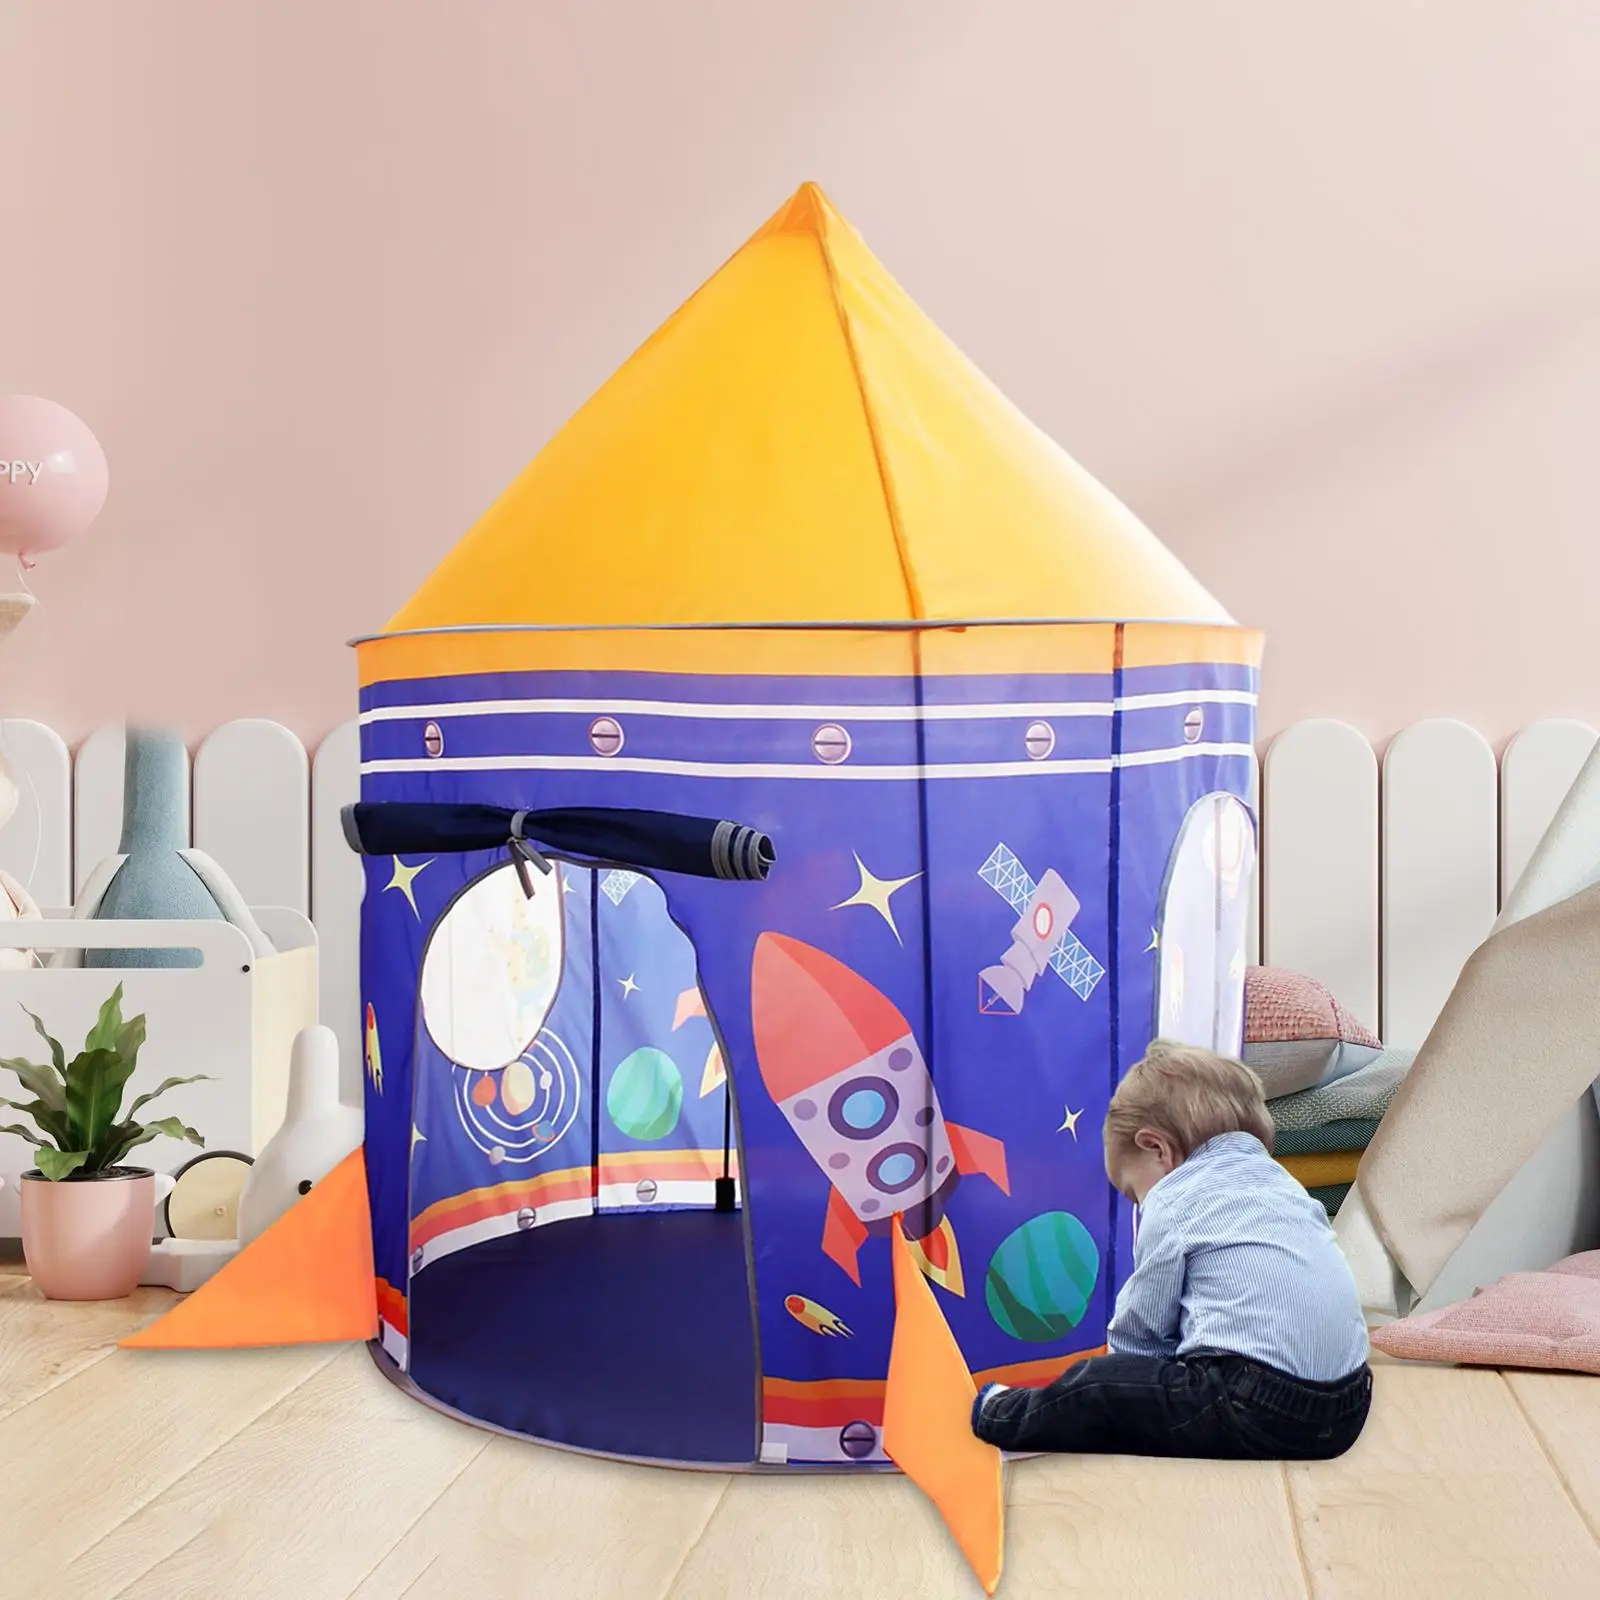 Indoor and Outdoor Play Tent Birhtday Gifts Baby Bedroom Furniture Kids Play Tent for Kids Toddlers Children Girls Boys Aged 3+